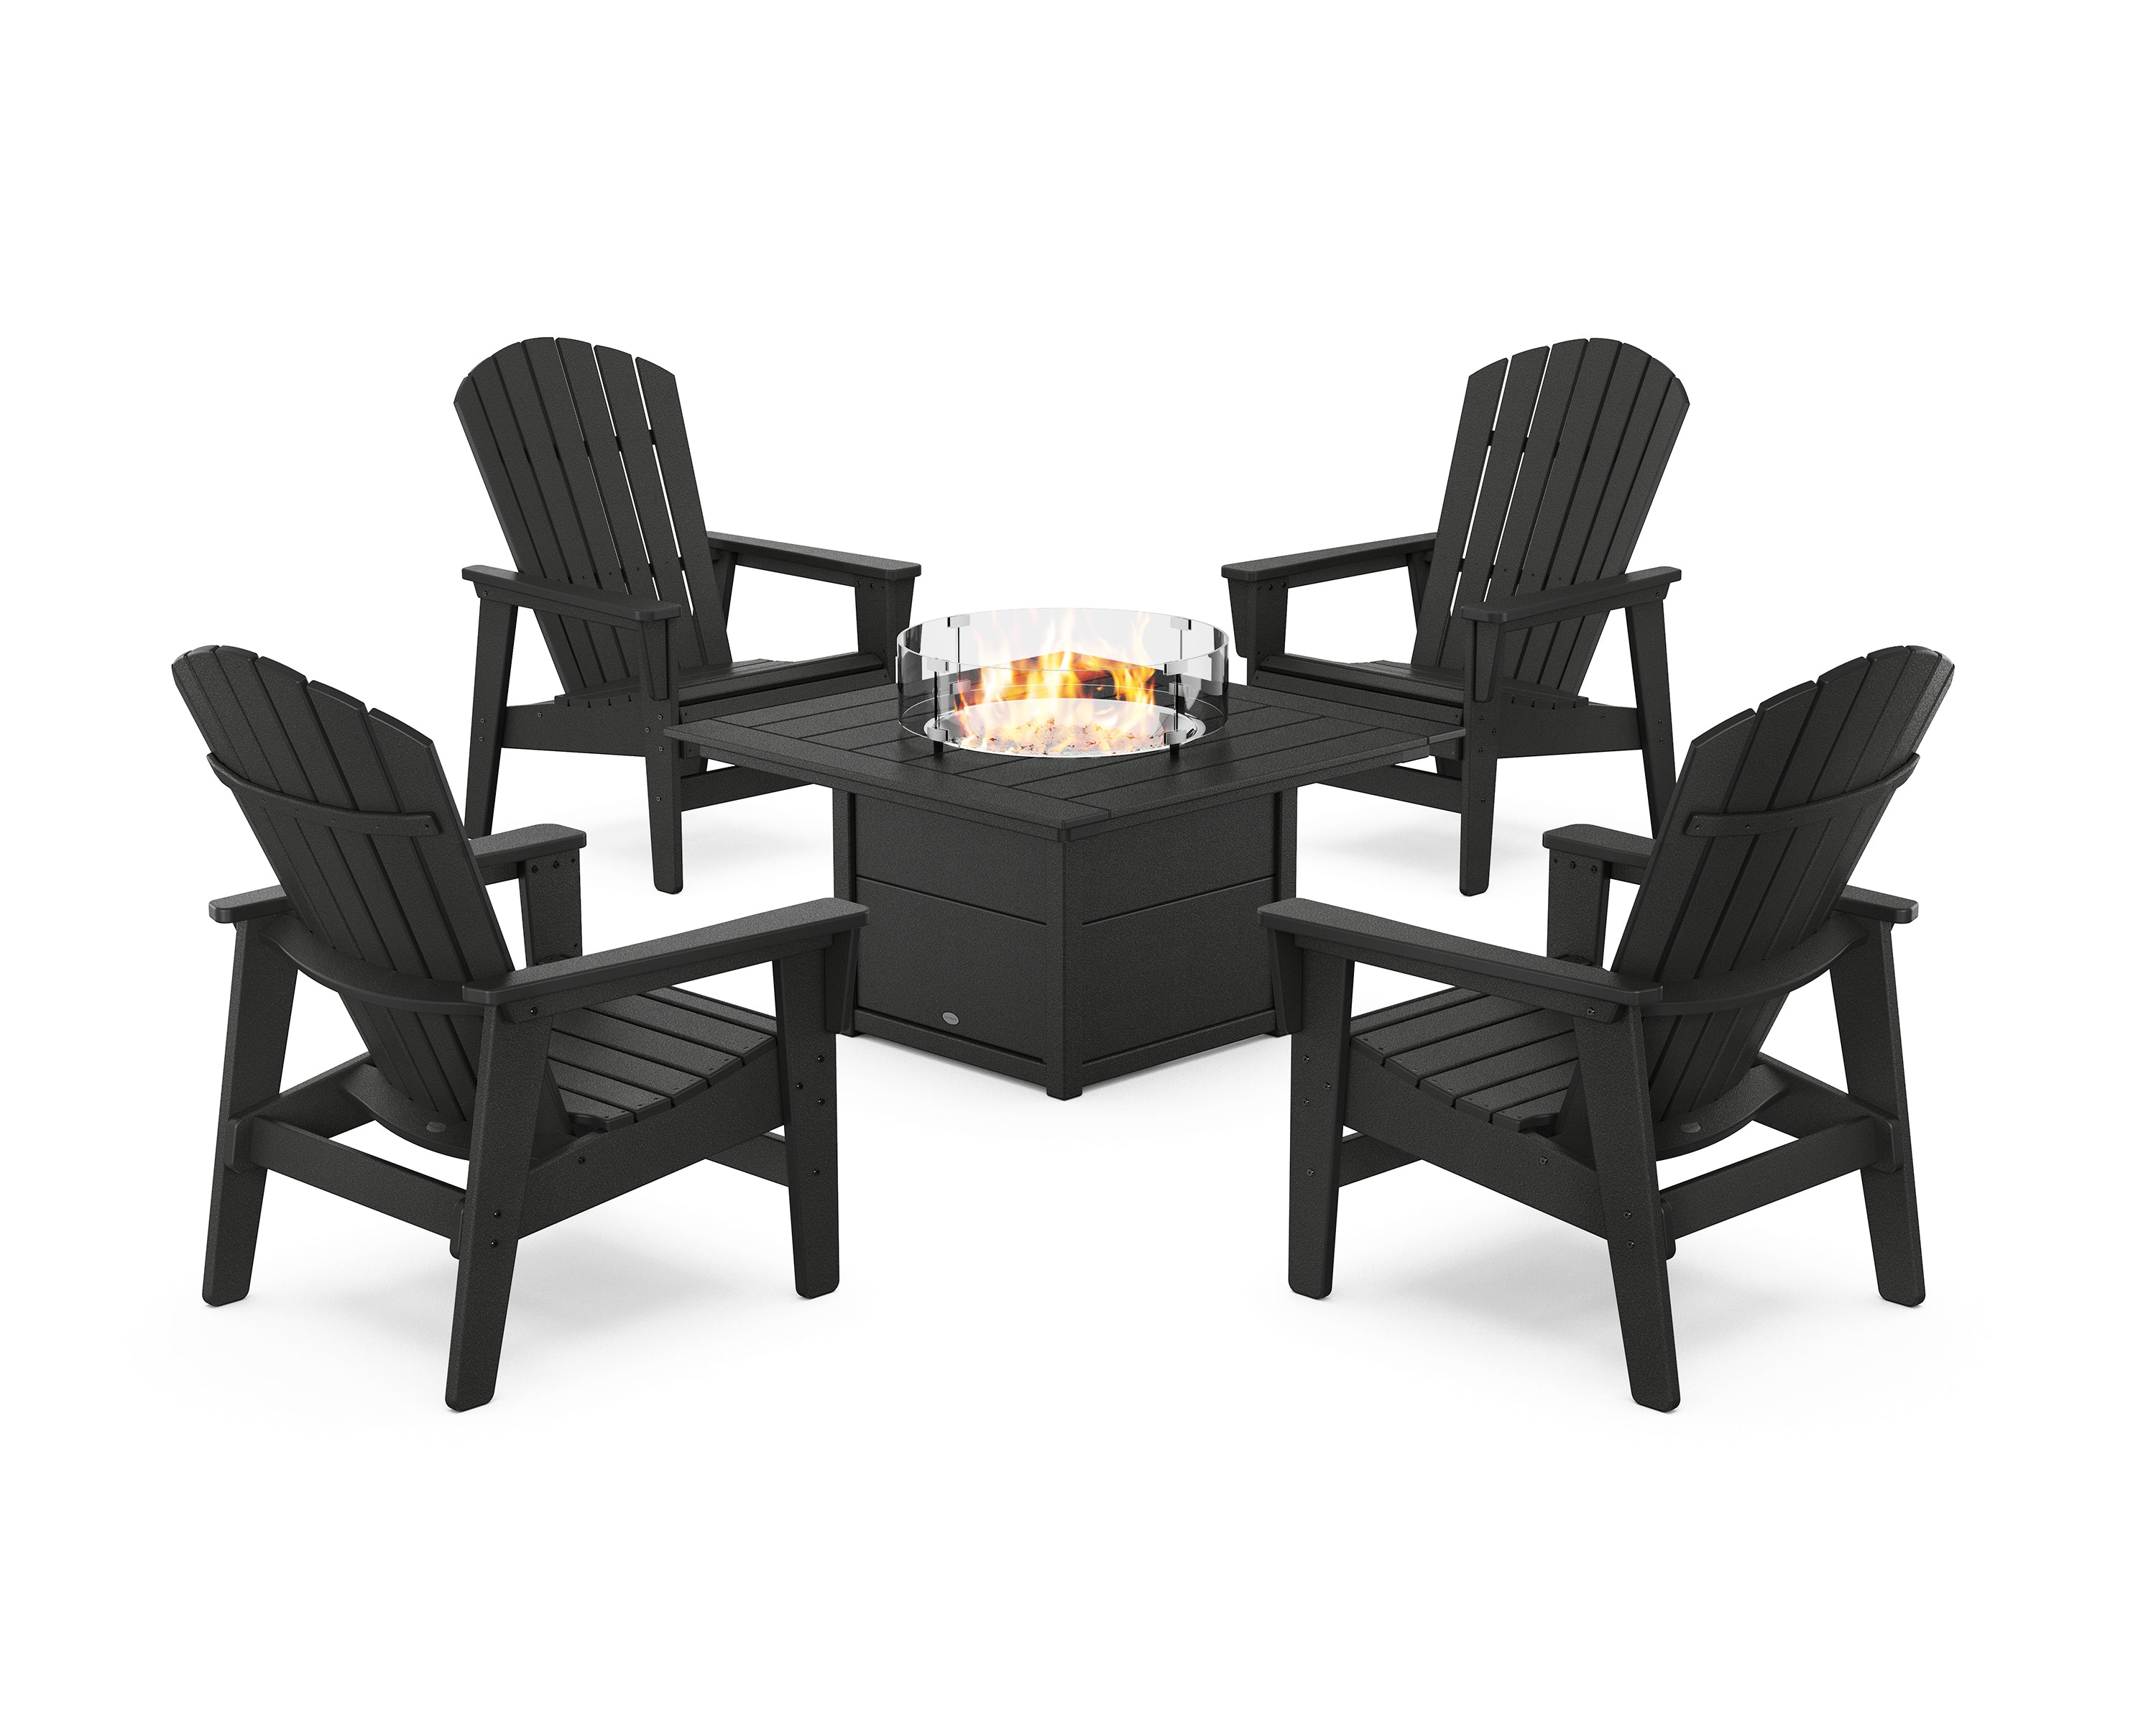 POLYWOOD® 5-Piece Nautical Grand Upright Adirondack Conversation Set with Fire Pit Table in Black